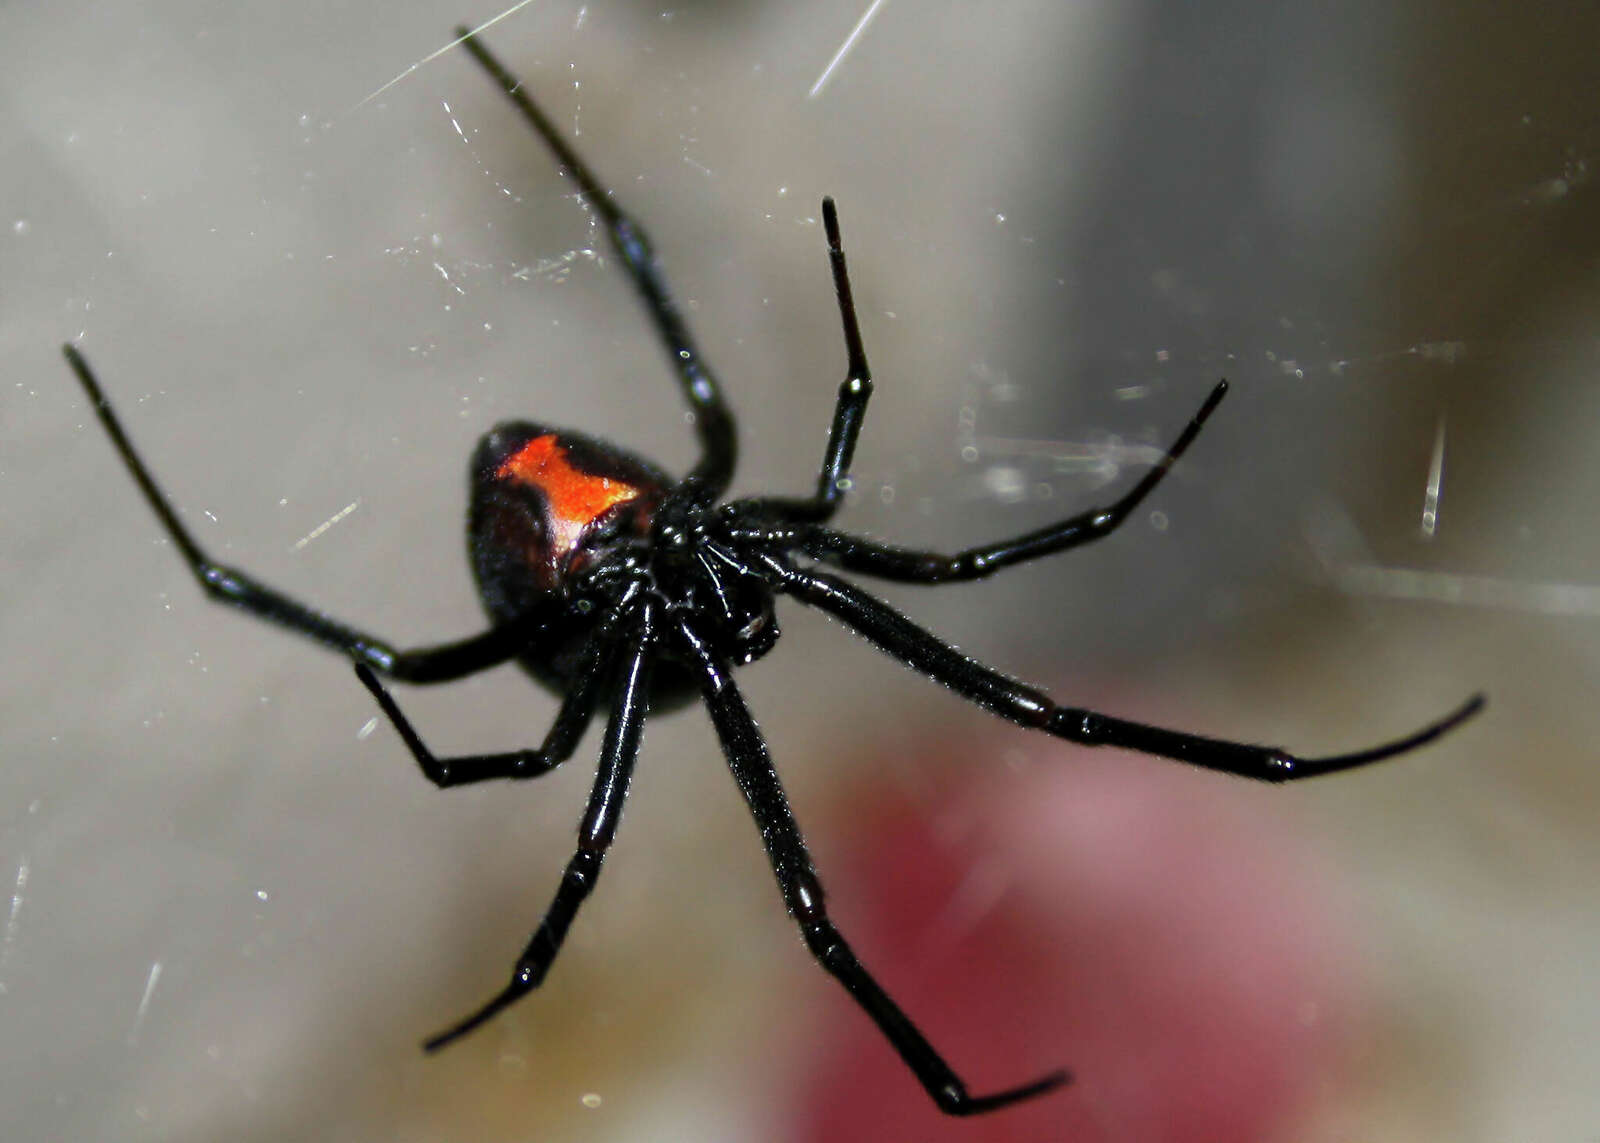 An image of a black widow spider.